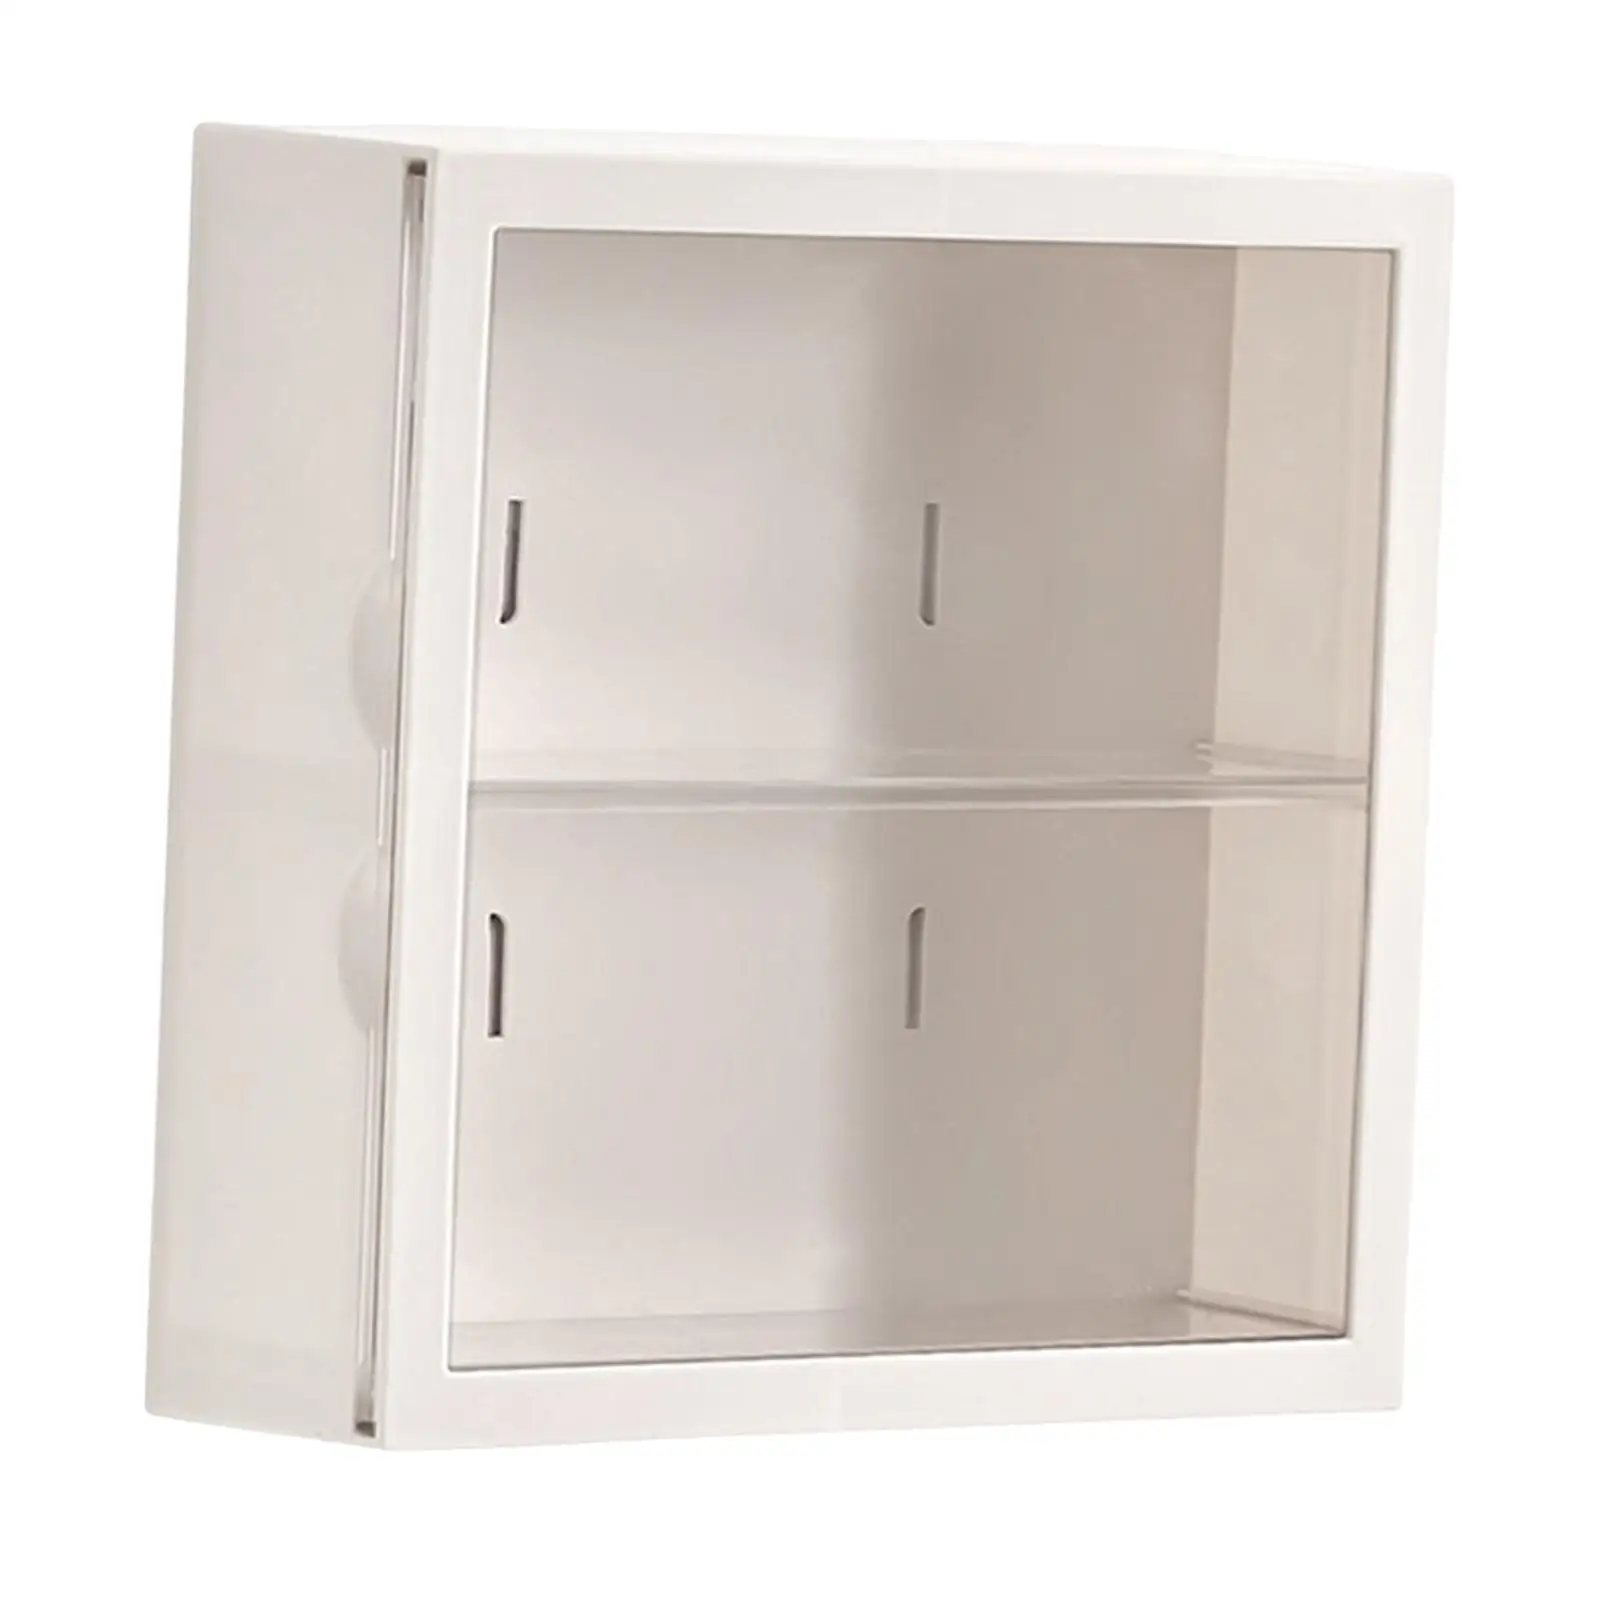 Clear Display Case Storage Box Dustproof Protection Showcase Wall Mounted Display Box Countertop Cabinet for Toy